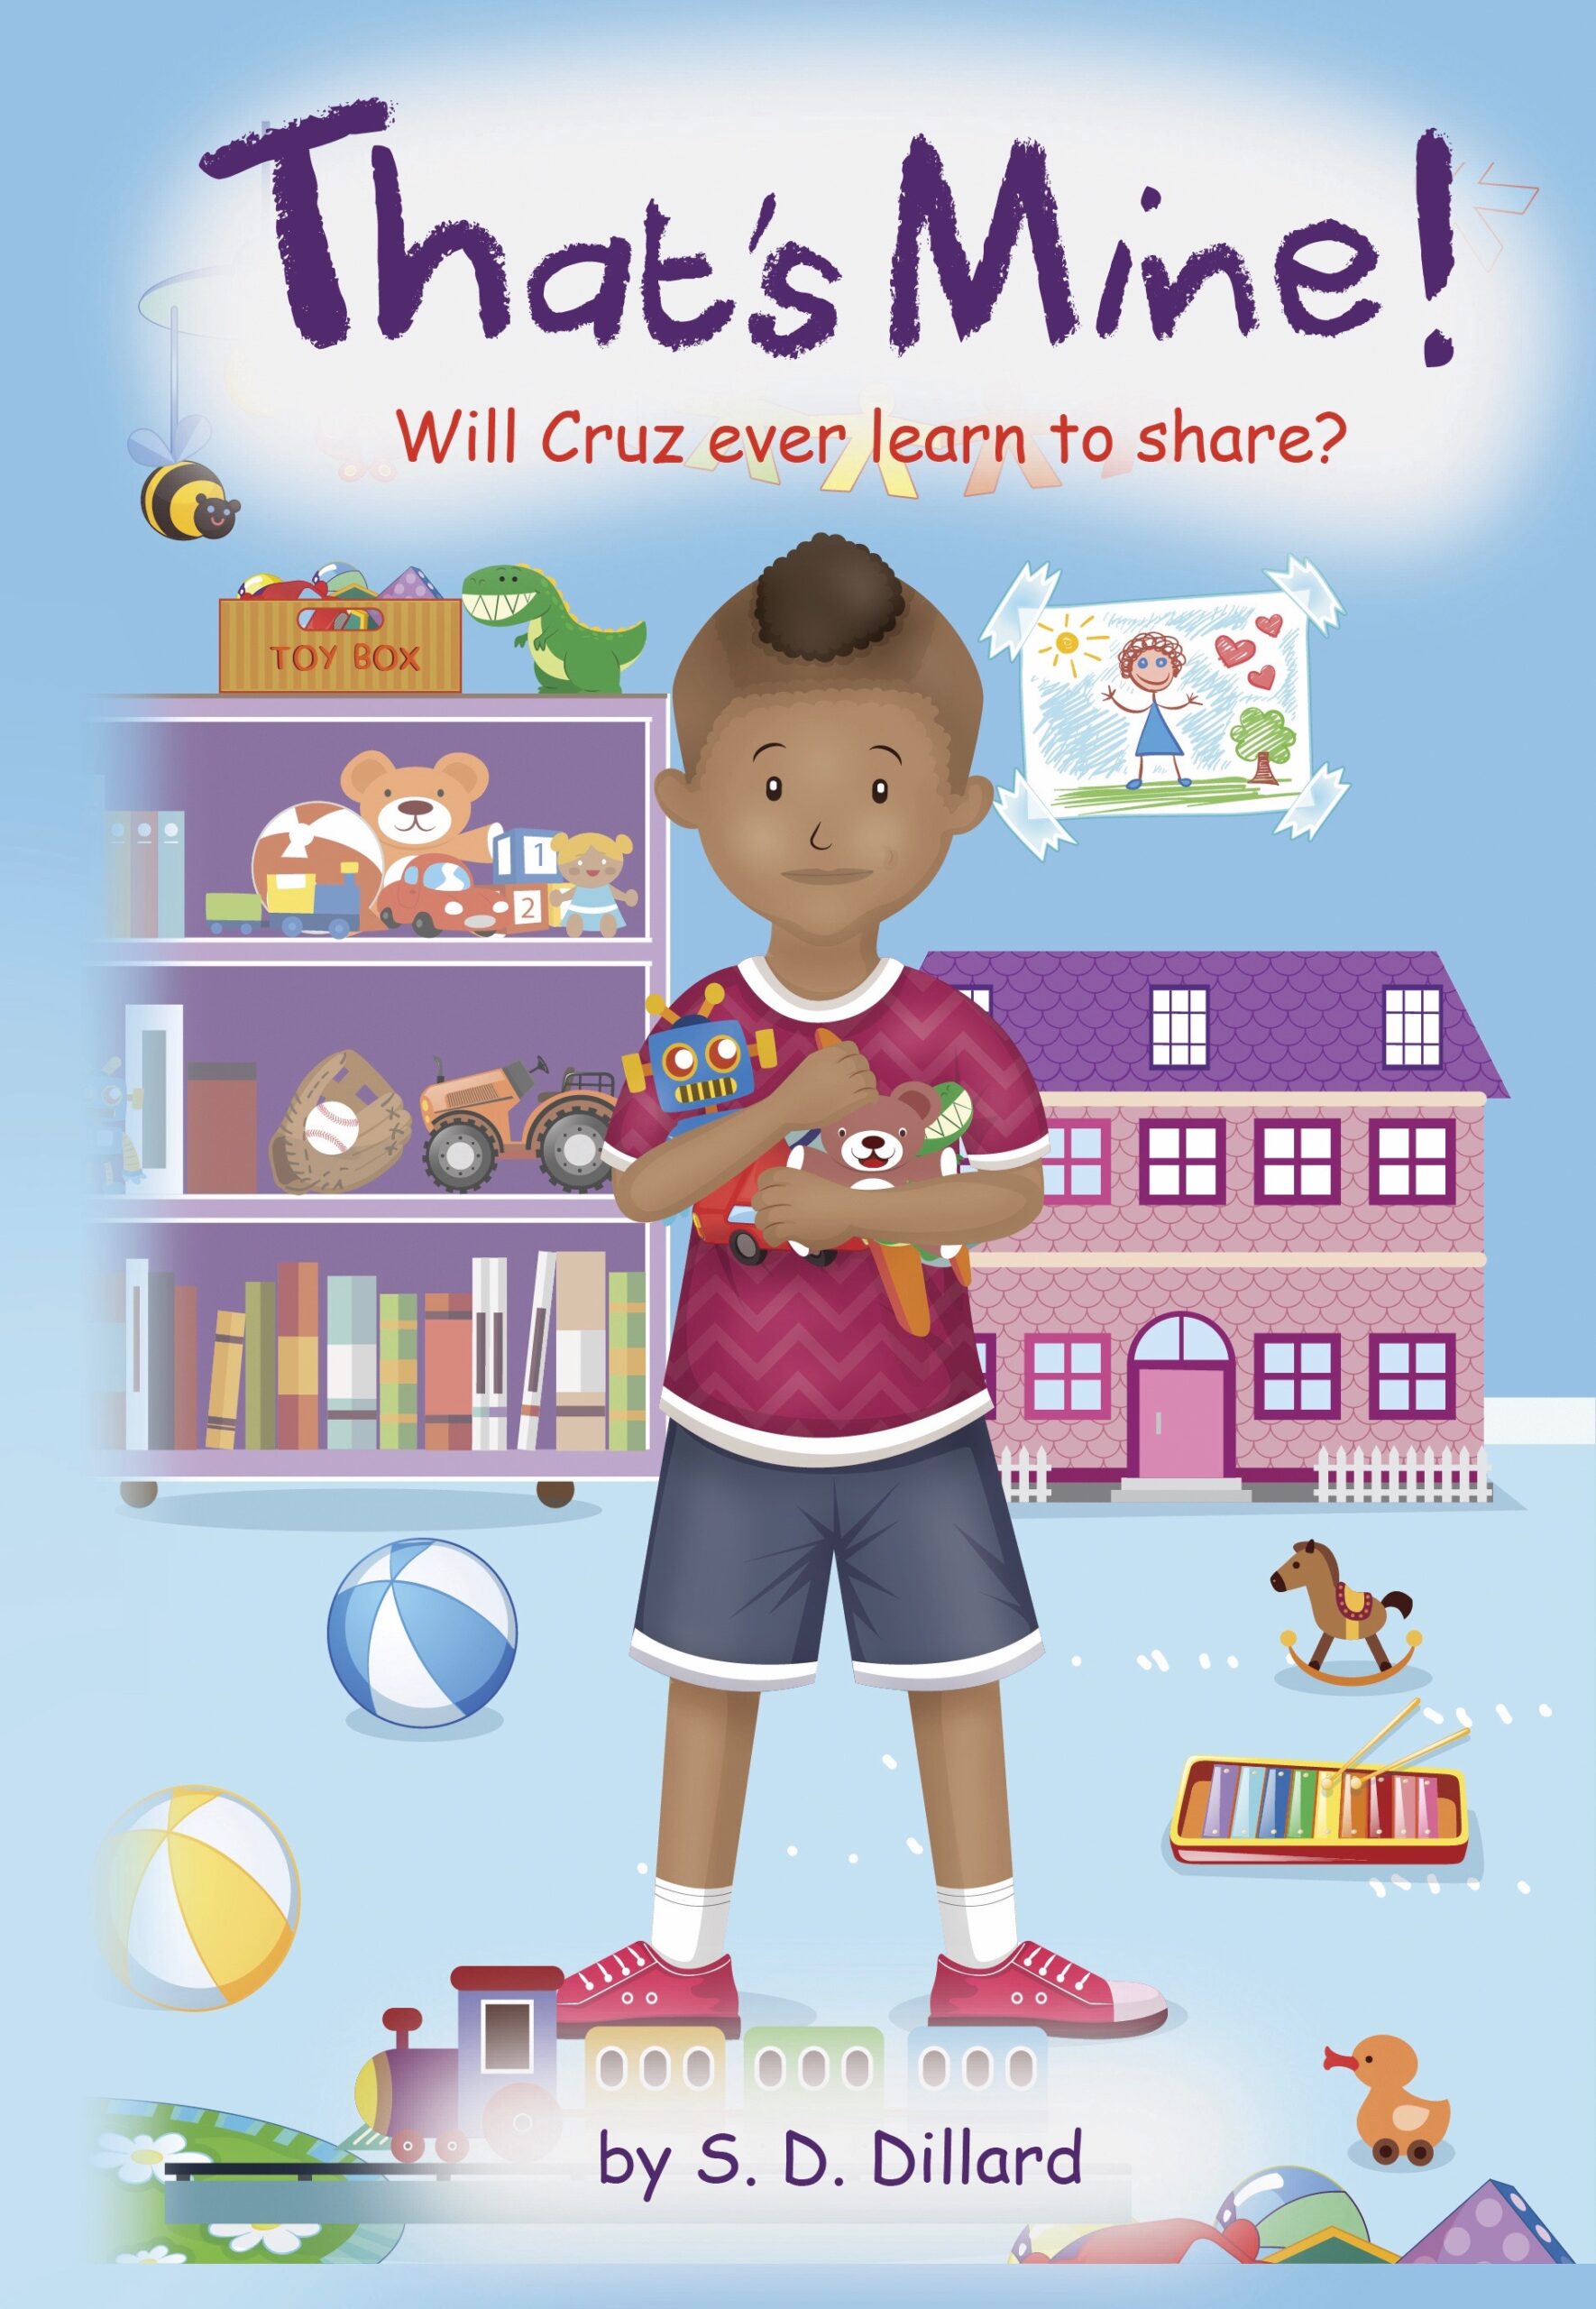 FREE: That’s Mine! Will Cruz ever learn to share? by S. D. Dillard